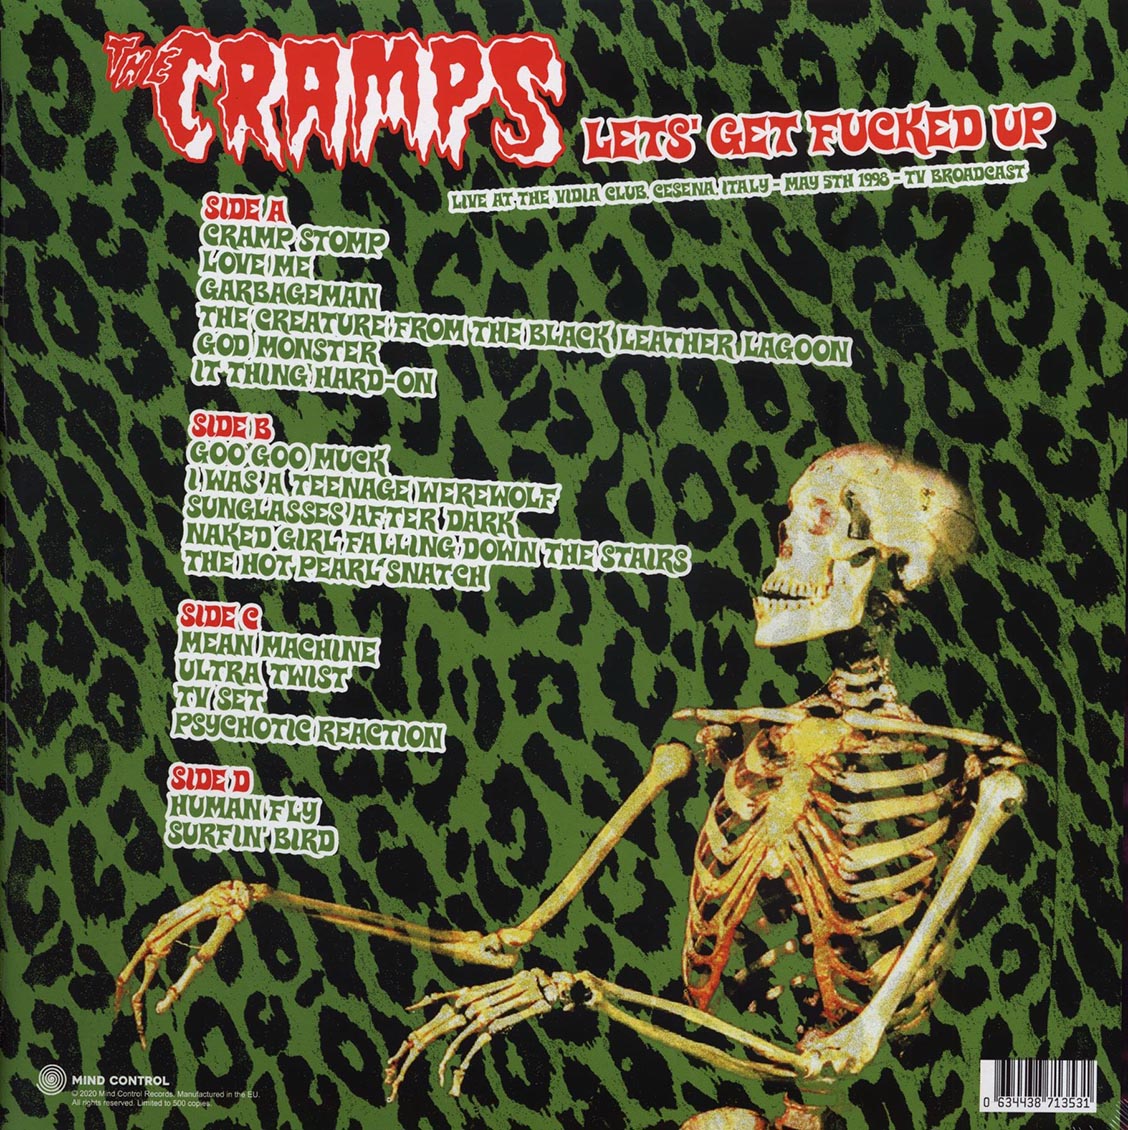 The Cramps - Let's Get F----- Up: Live At The Vidia Club, Cesena, Italy May 5th 1989 TV Broadcast (ltd. 500 copies made) (2xLP) - Vinyl LP, LP